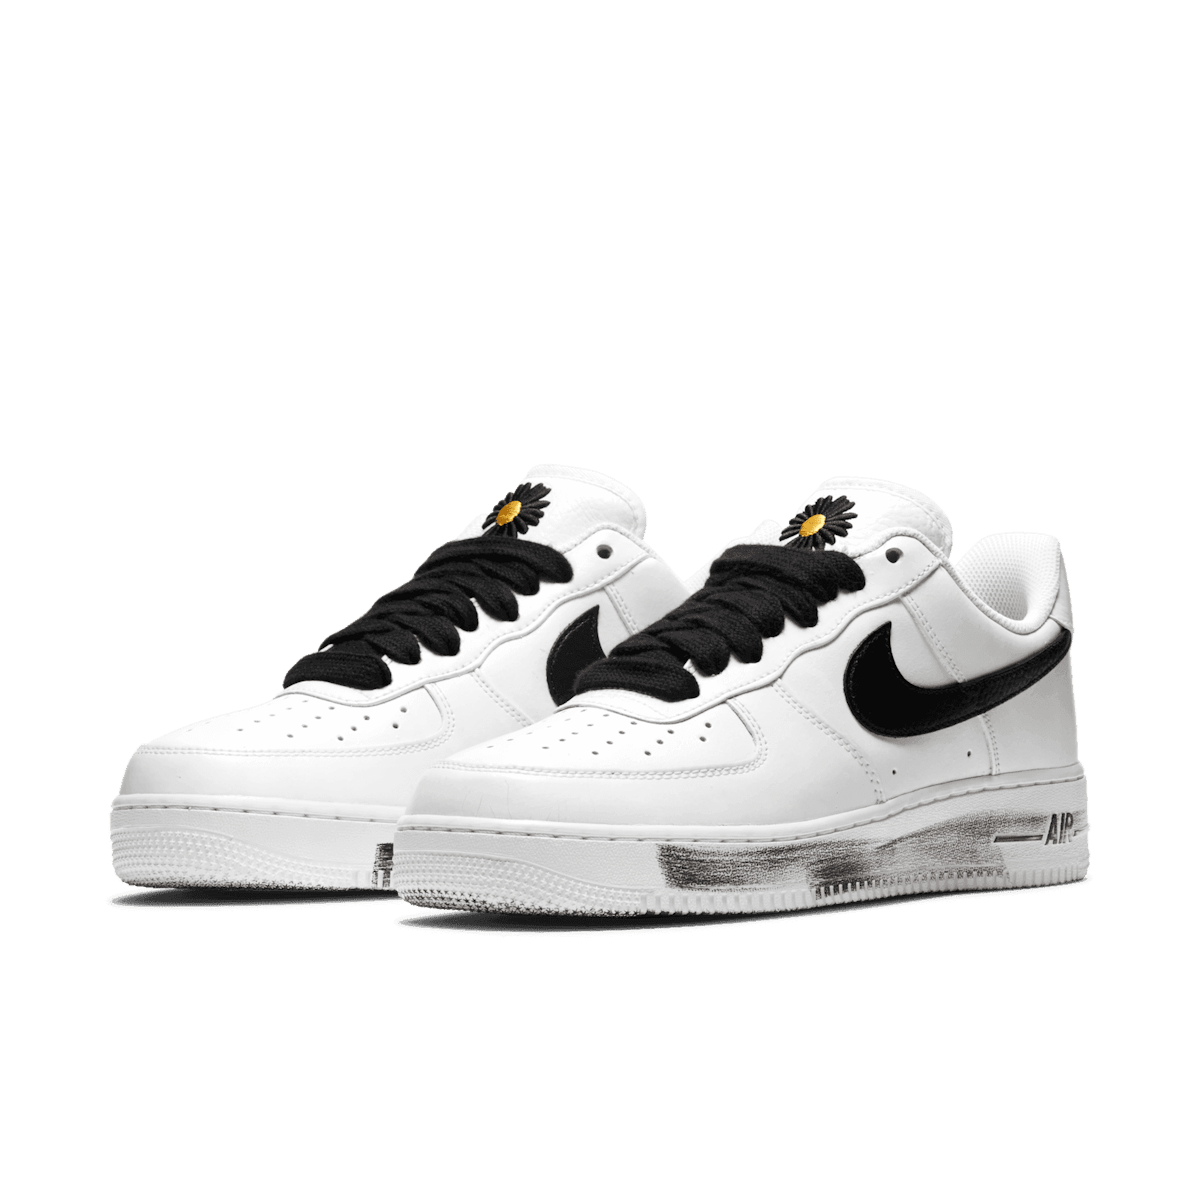 Nike Air Force 1 Low G-Dragon Peaceminusone Para-Noise 2.0 Angle 2